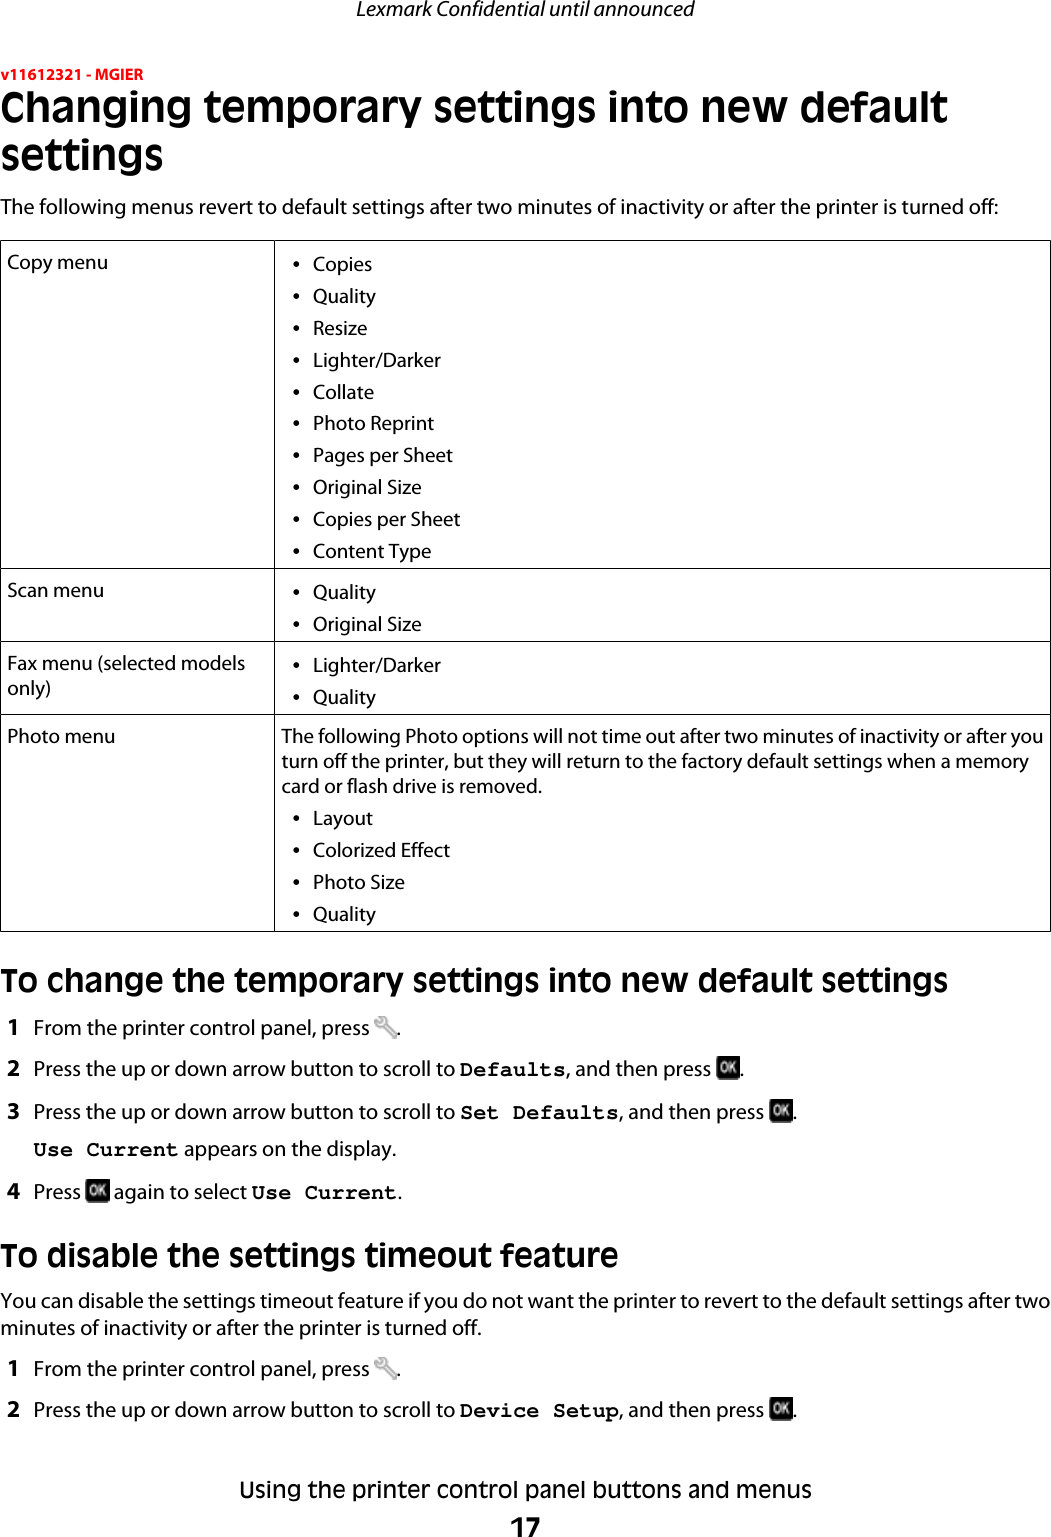 v11612321 - MGIERChanging temporary settings into new defaultsettingsThe following menus revert to default settings after two minutes of inactivity or after the printer is turned off:Copy menu •Copies•Quality•Resize•Lighter/Darker•Collate•Photo Reprint•Pages per Sheet•Original Size•Copies per Sheet•Content TypeScan menu •Quality•Original SizeFax menu (selected modelsonly) •Lighter/Darker•QualityPhoto menu The following Photo options will not time out after two minutes of inactivity or after youturn off the printer, but they will return to the factory default settings when a memorycard or flash drive is removed.•Layout•Colorized Effect•Photo Size•QualityTo change the temporary settings into new default settings1From the printer control panel, press  .2Press the up or down arrow button to scroll to Defaults, and then press  .3Press the up or down arrow button to scroll to Set Defaults, and then press  .Use Current appears on the display.4Press   again to select Use Current.To disable the settings timeout featureYou can disable the settings timeout feature if you do not want the printer to revert to the default settings after twominutes of inactivity or after the printer is turned off.1From the printer control panel, press  .2Press the up or down arrow button to scroll to Device Setup, and then press  .Lexmark Confidential until announcedUsing the printer control panel buttons and menus17